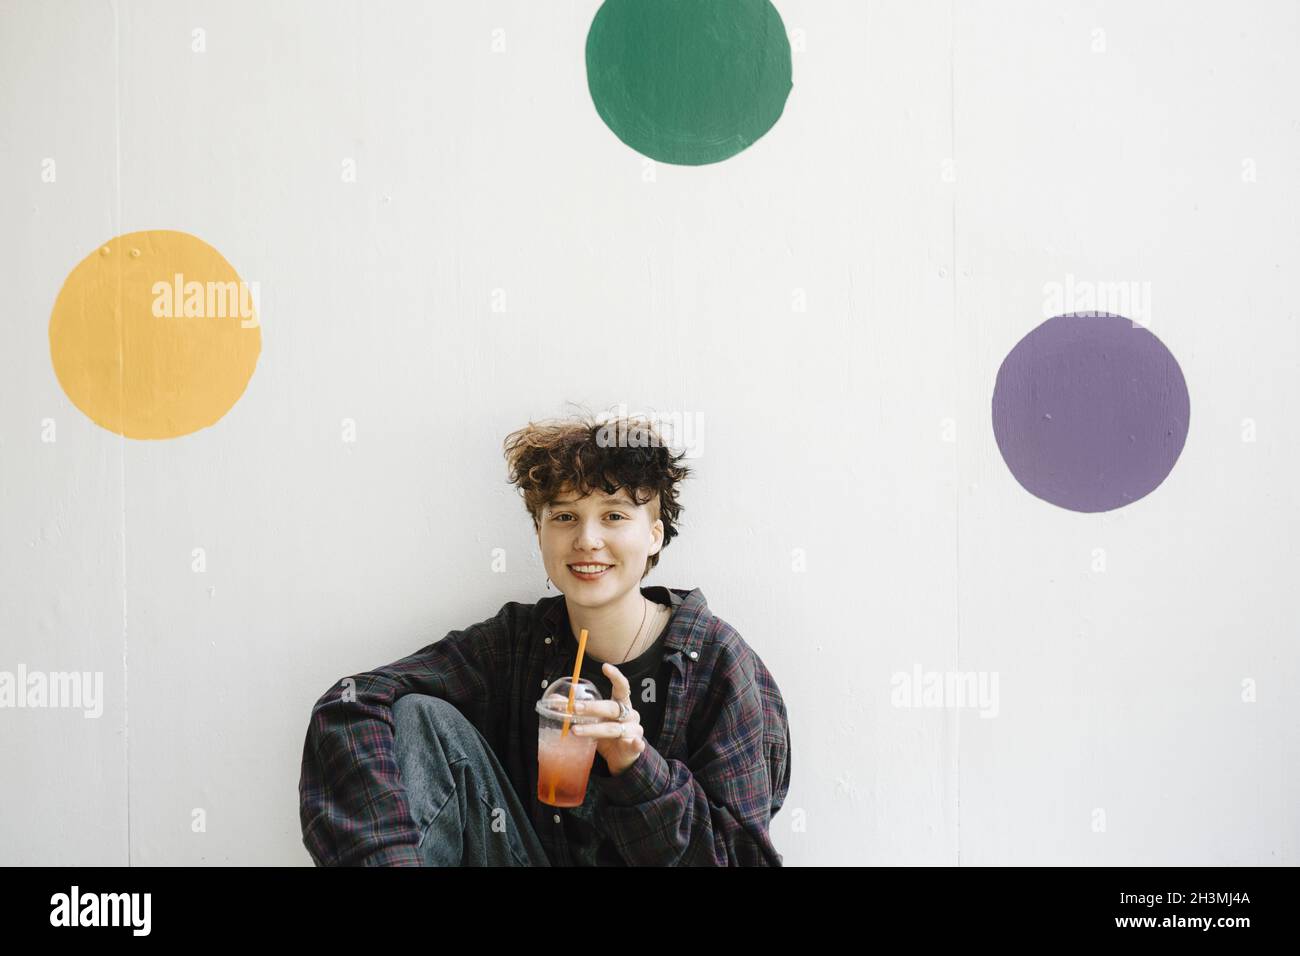 Portrait of smiling teenage boy drinking against polka dots on white wall Stock Photo